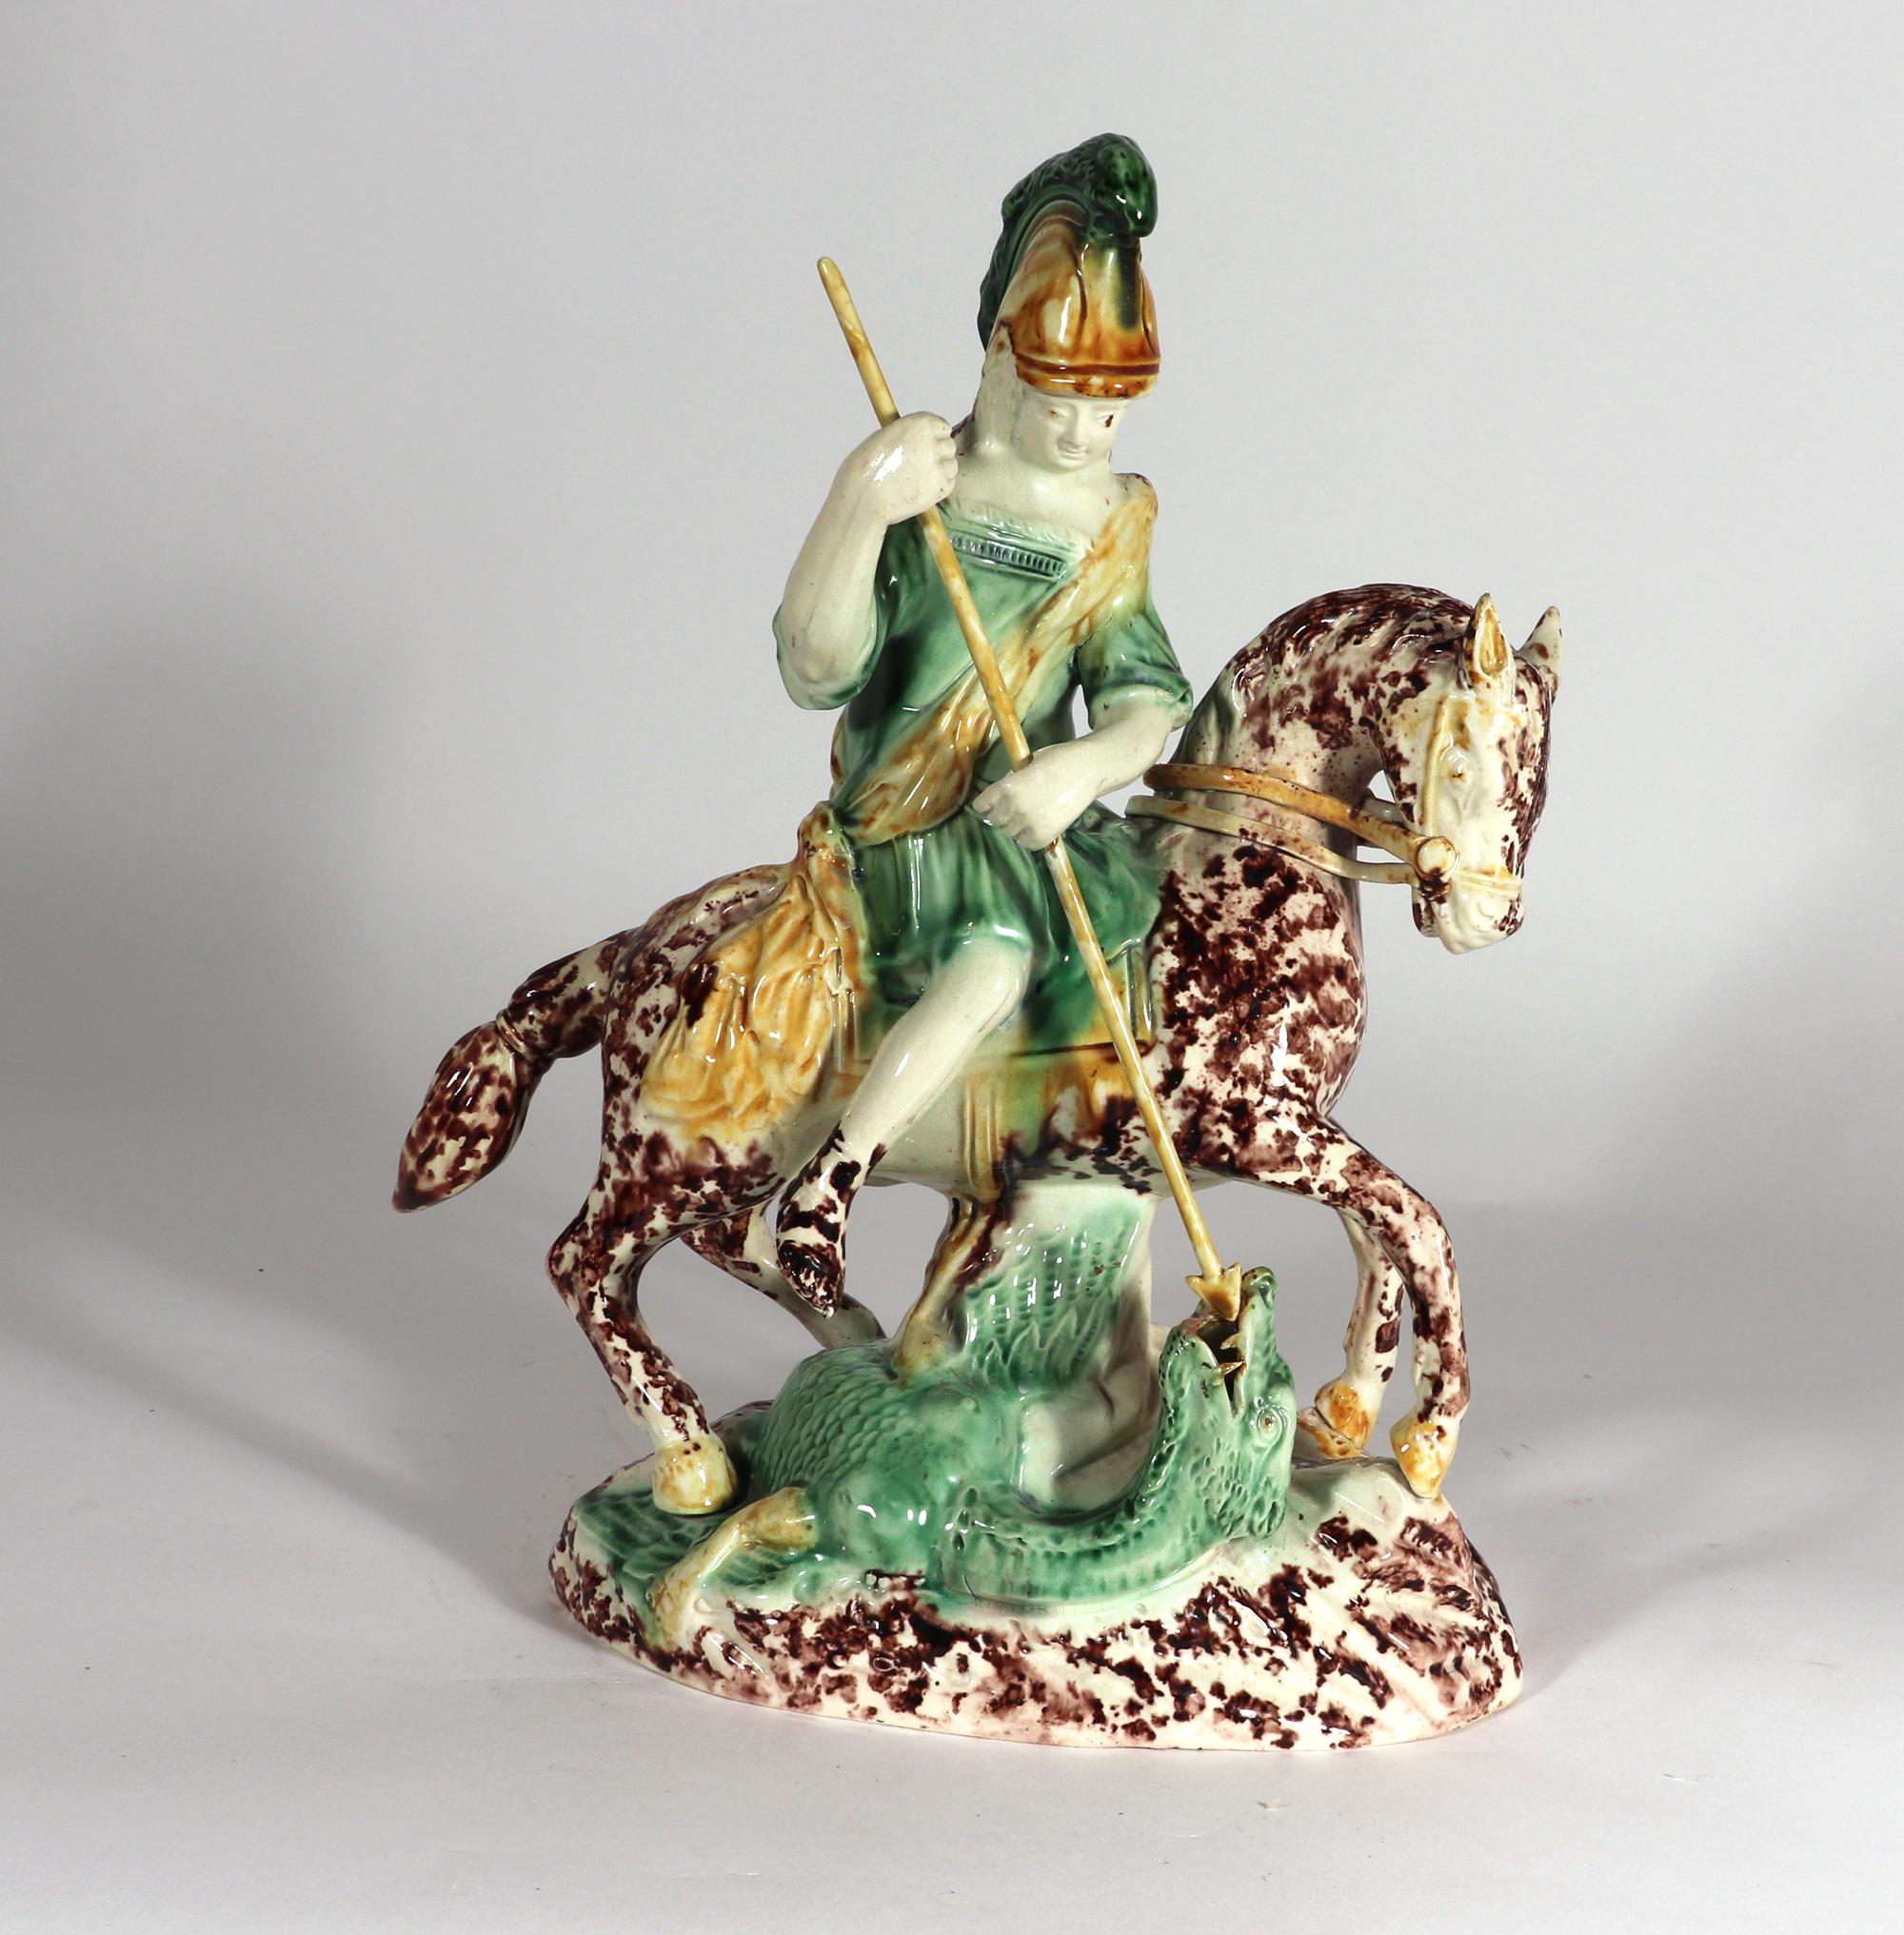 English Pottery Lead-glazed Earthenware Figure of St. George and the Dragon 3